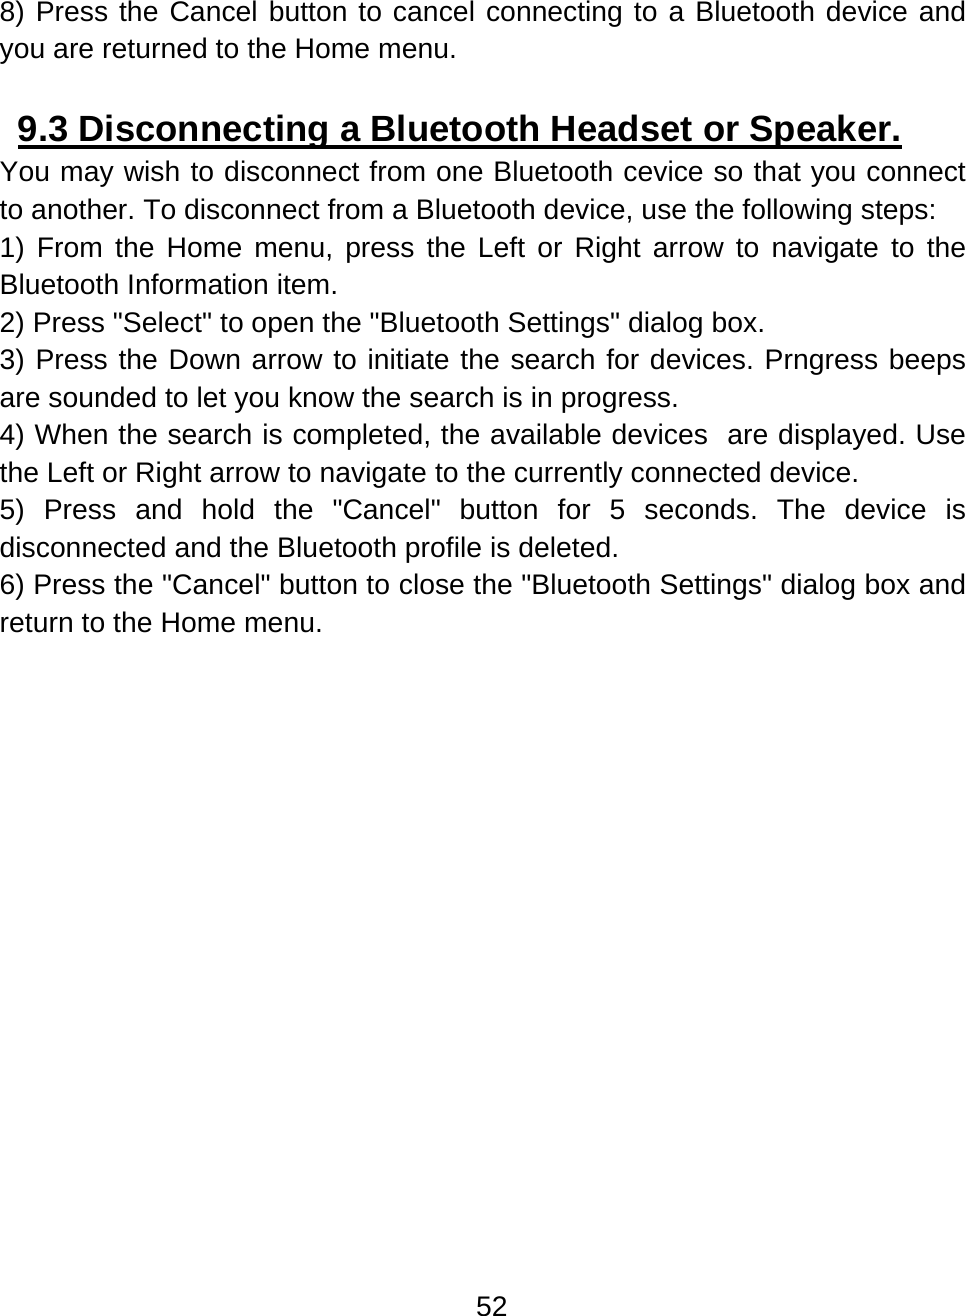 52  8) Press the Cancel button to cancel connecting to a Bluetooth device and you are returned to the Home menu.      9.3 Disconnecting a Bluetooth Headset or Speaker.  You may wish to disconnect from one Bluetooth cevice so that you connect to another. To disconnect from a Bluetooth device, use the following steps: 1) From the Home menu, press the Left or Right arrow to navigate to the Bluetooth Information item. 2) Press &quot;Select&quot; to open the &quot;Bluetooth Settings&quot; dialog box. 3) Press the Down arrow to initiate the search for devices. Prngress beeps are sounded to let you know the search is in progress. 4) When the search is completed, the available devices  are displayed. Use the Left or Right arrow to navigate to the currently connected device. 5) Press and hold the &quot;Cancel&quot; button for 5 seconds. The device is disconnected and the Bluetooth profile is deleted. 6) Press the &quot;Cancel&quot; button to close the &quot;Bluetooth Settings&quot; dialog box and return to the Home menu.   